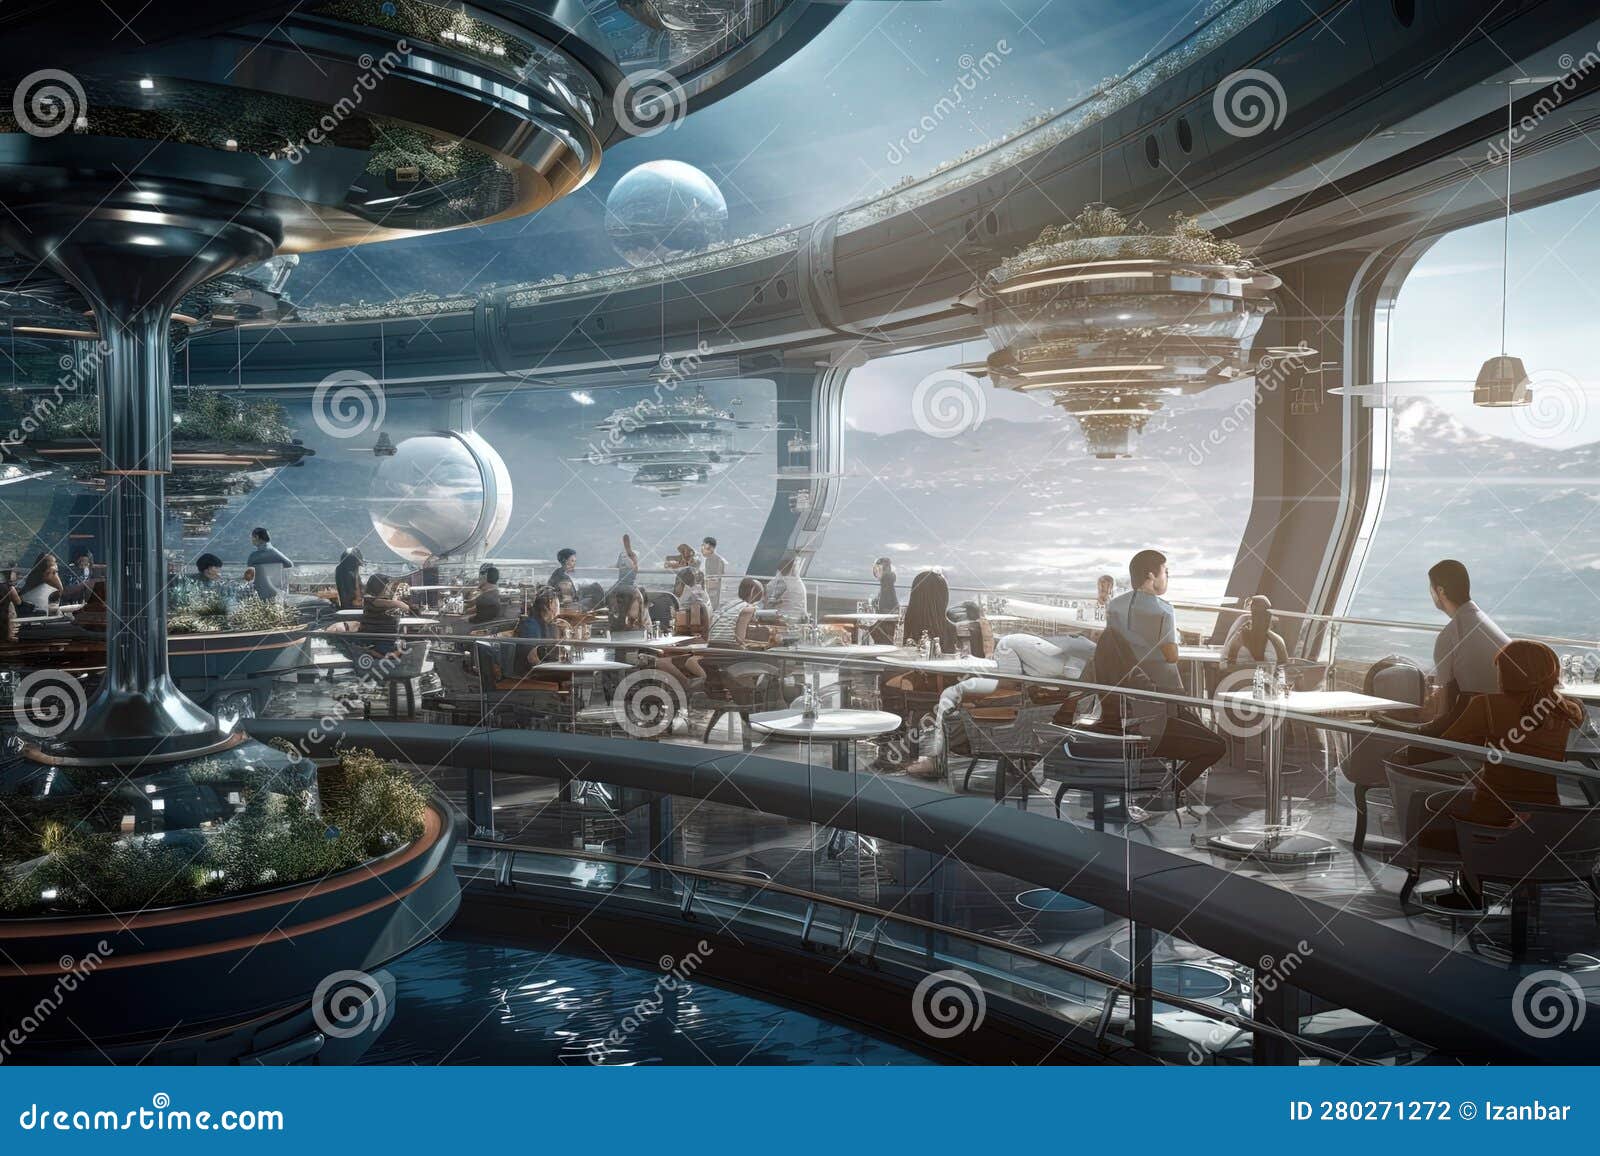 space station restaurant orbiting a distant planet, where interstellar travelers enjoy futuristic cuisine synthesized from exotic